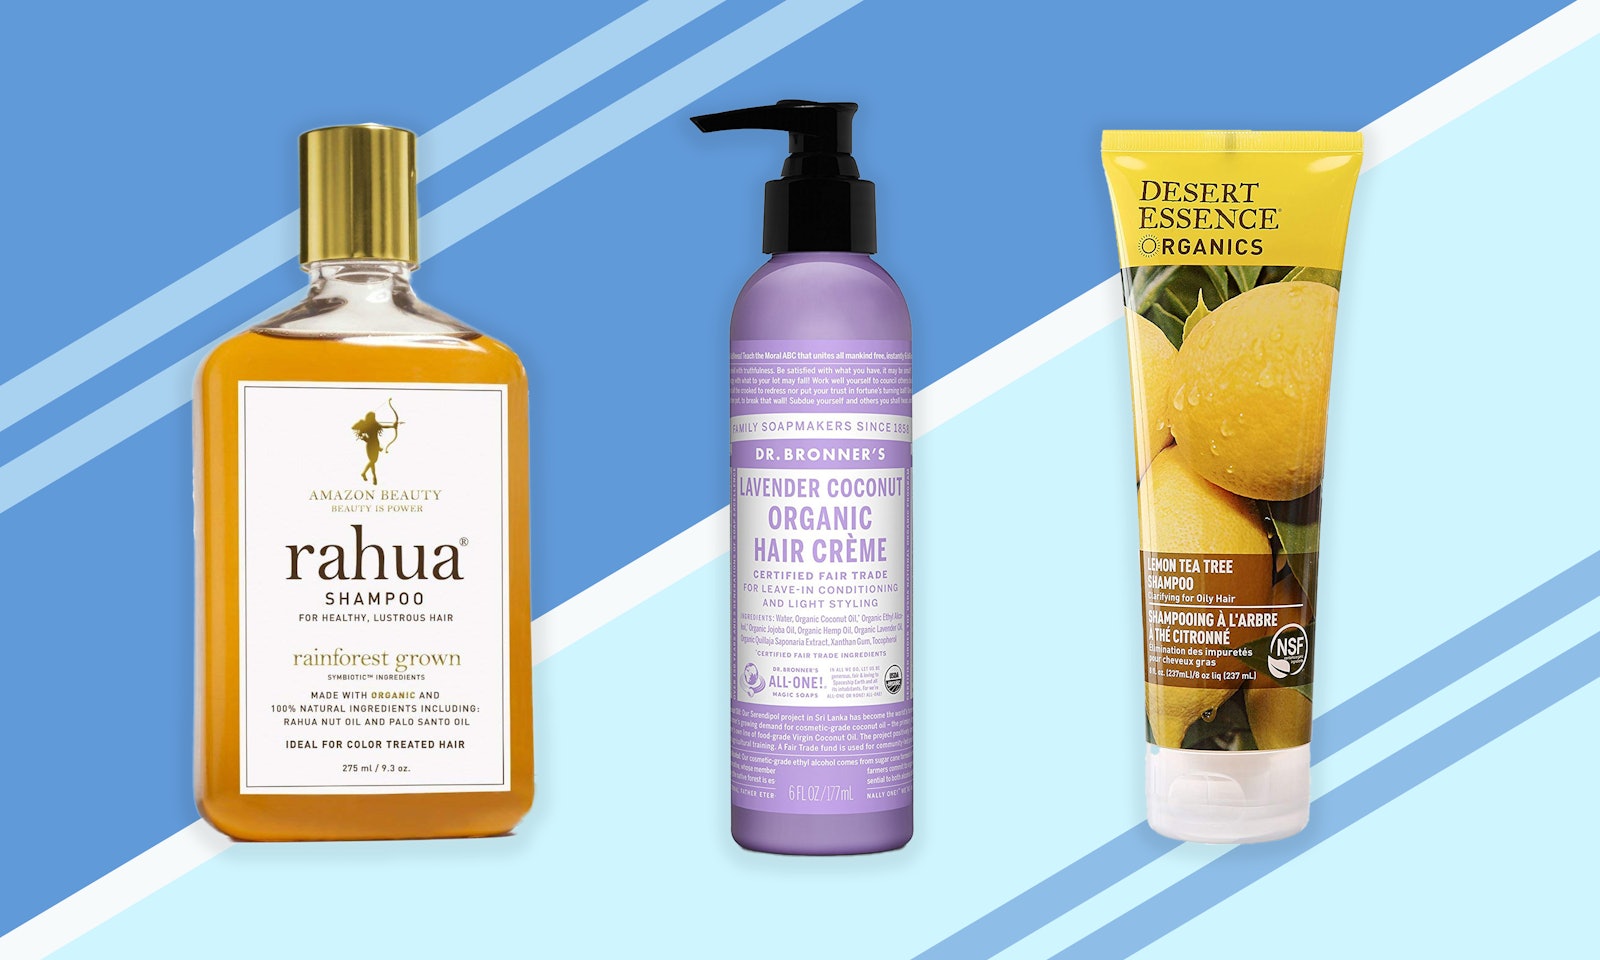 8. "The Best Shampoos and Conditioners for Light Blue Hair" - wide 7